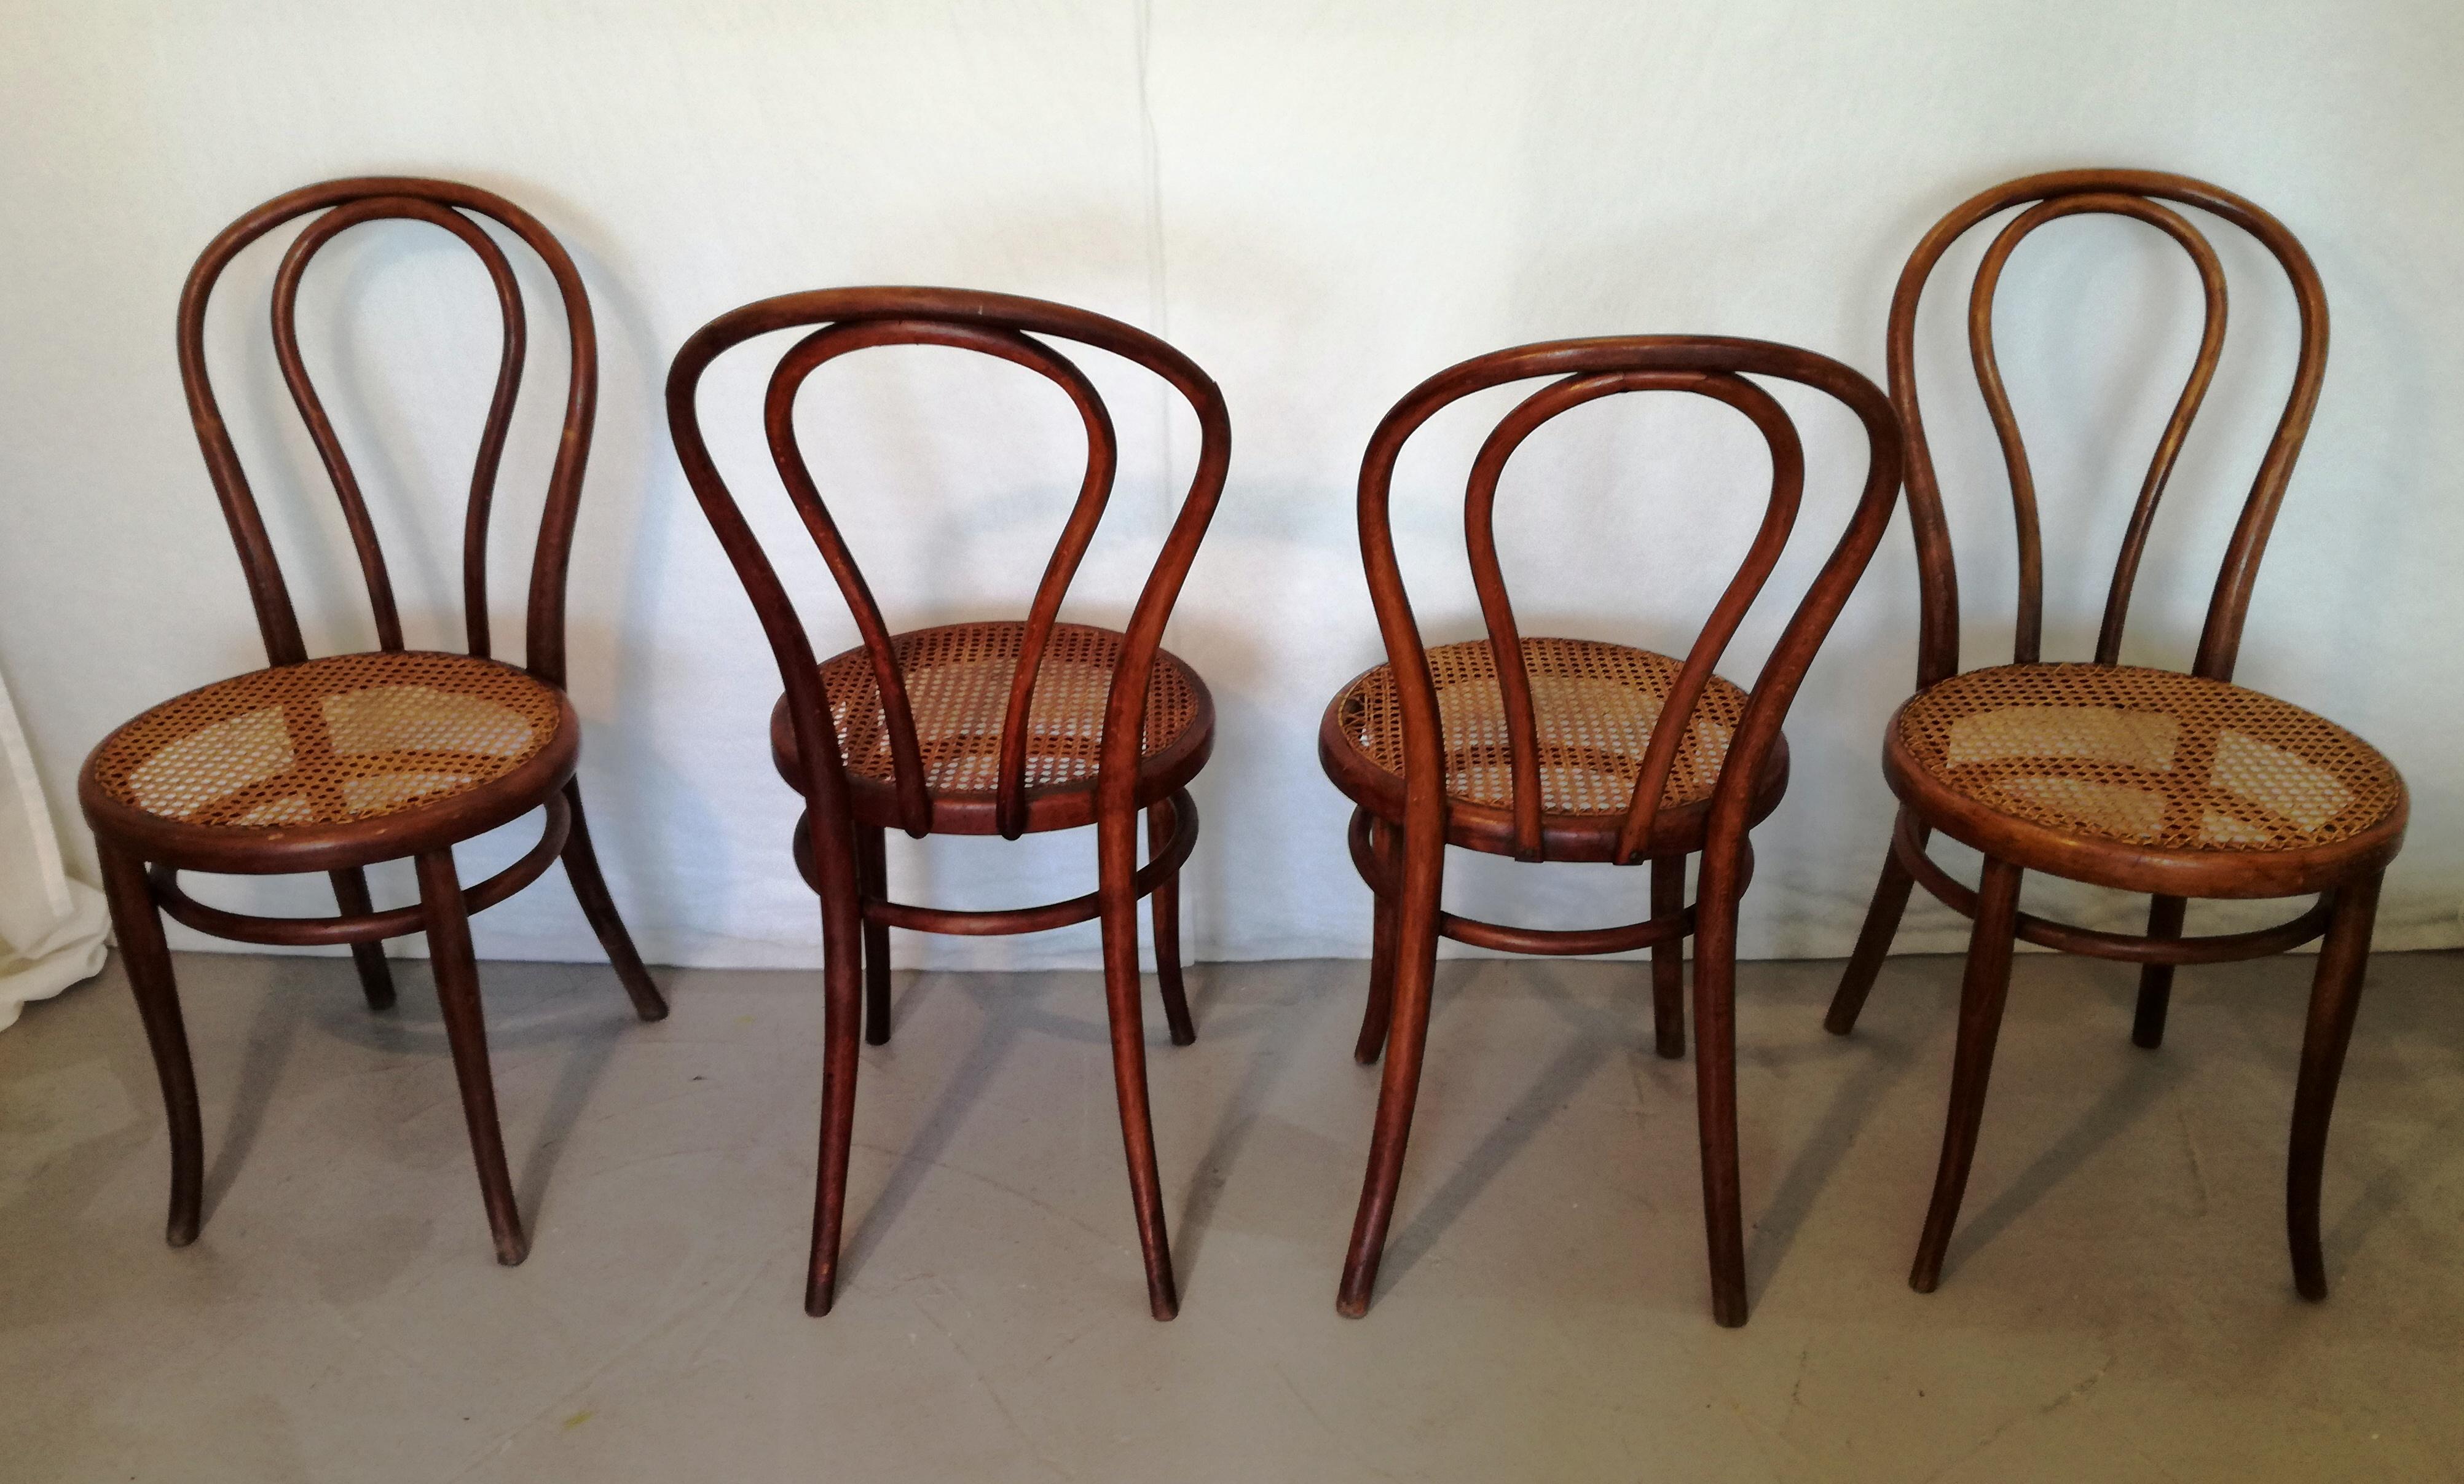 4 thonet-type chairs No. 18. 
1 branded Thonet Austria ,2 branded Thonet ,1 branded jacob & koln .the chairs are practically the same as each other. the wooden frames bear woodworm holes (treatment performed). the seats bear signs of use. in